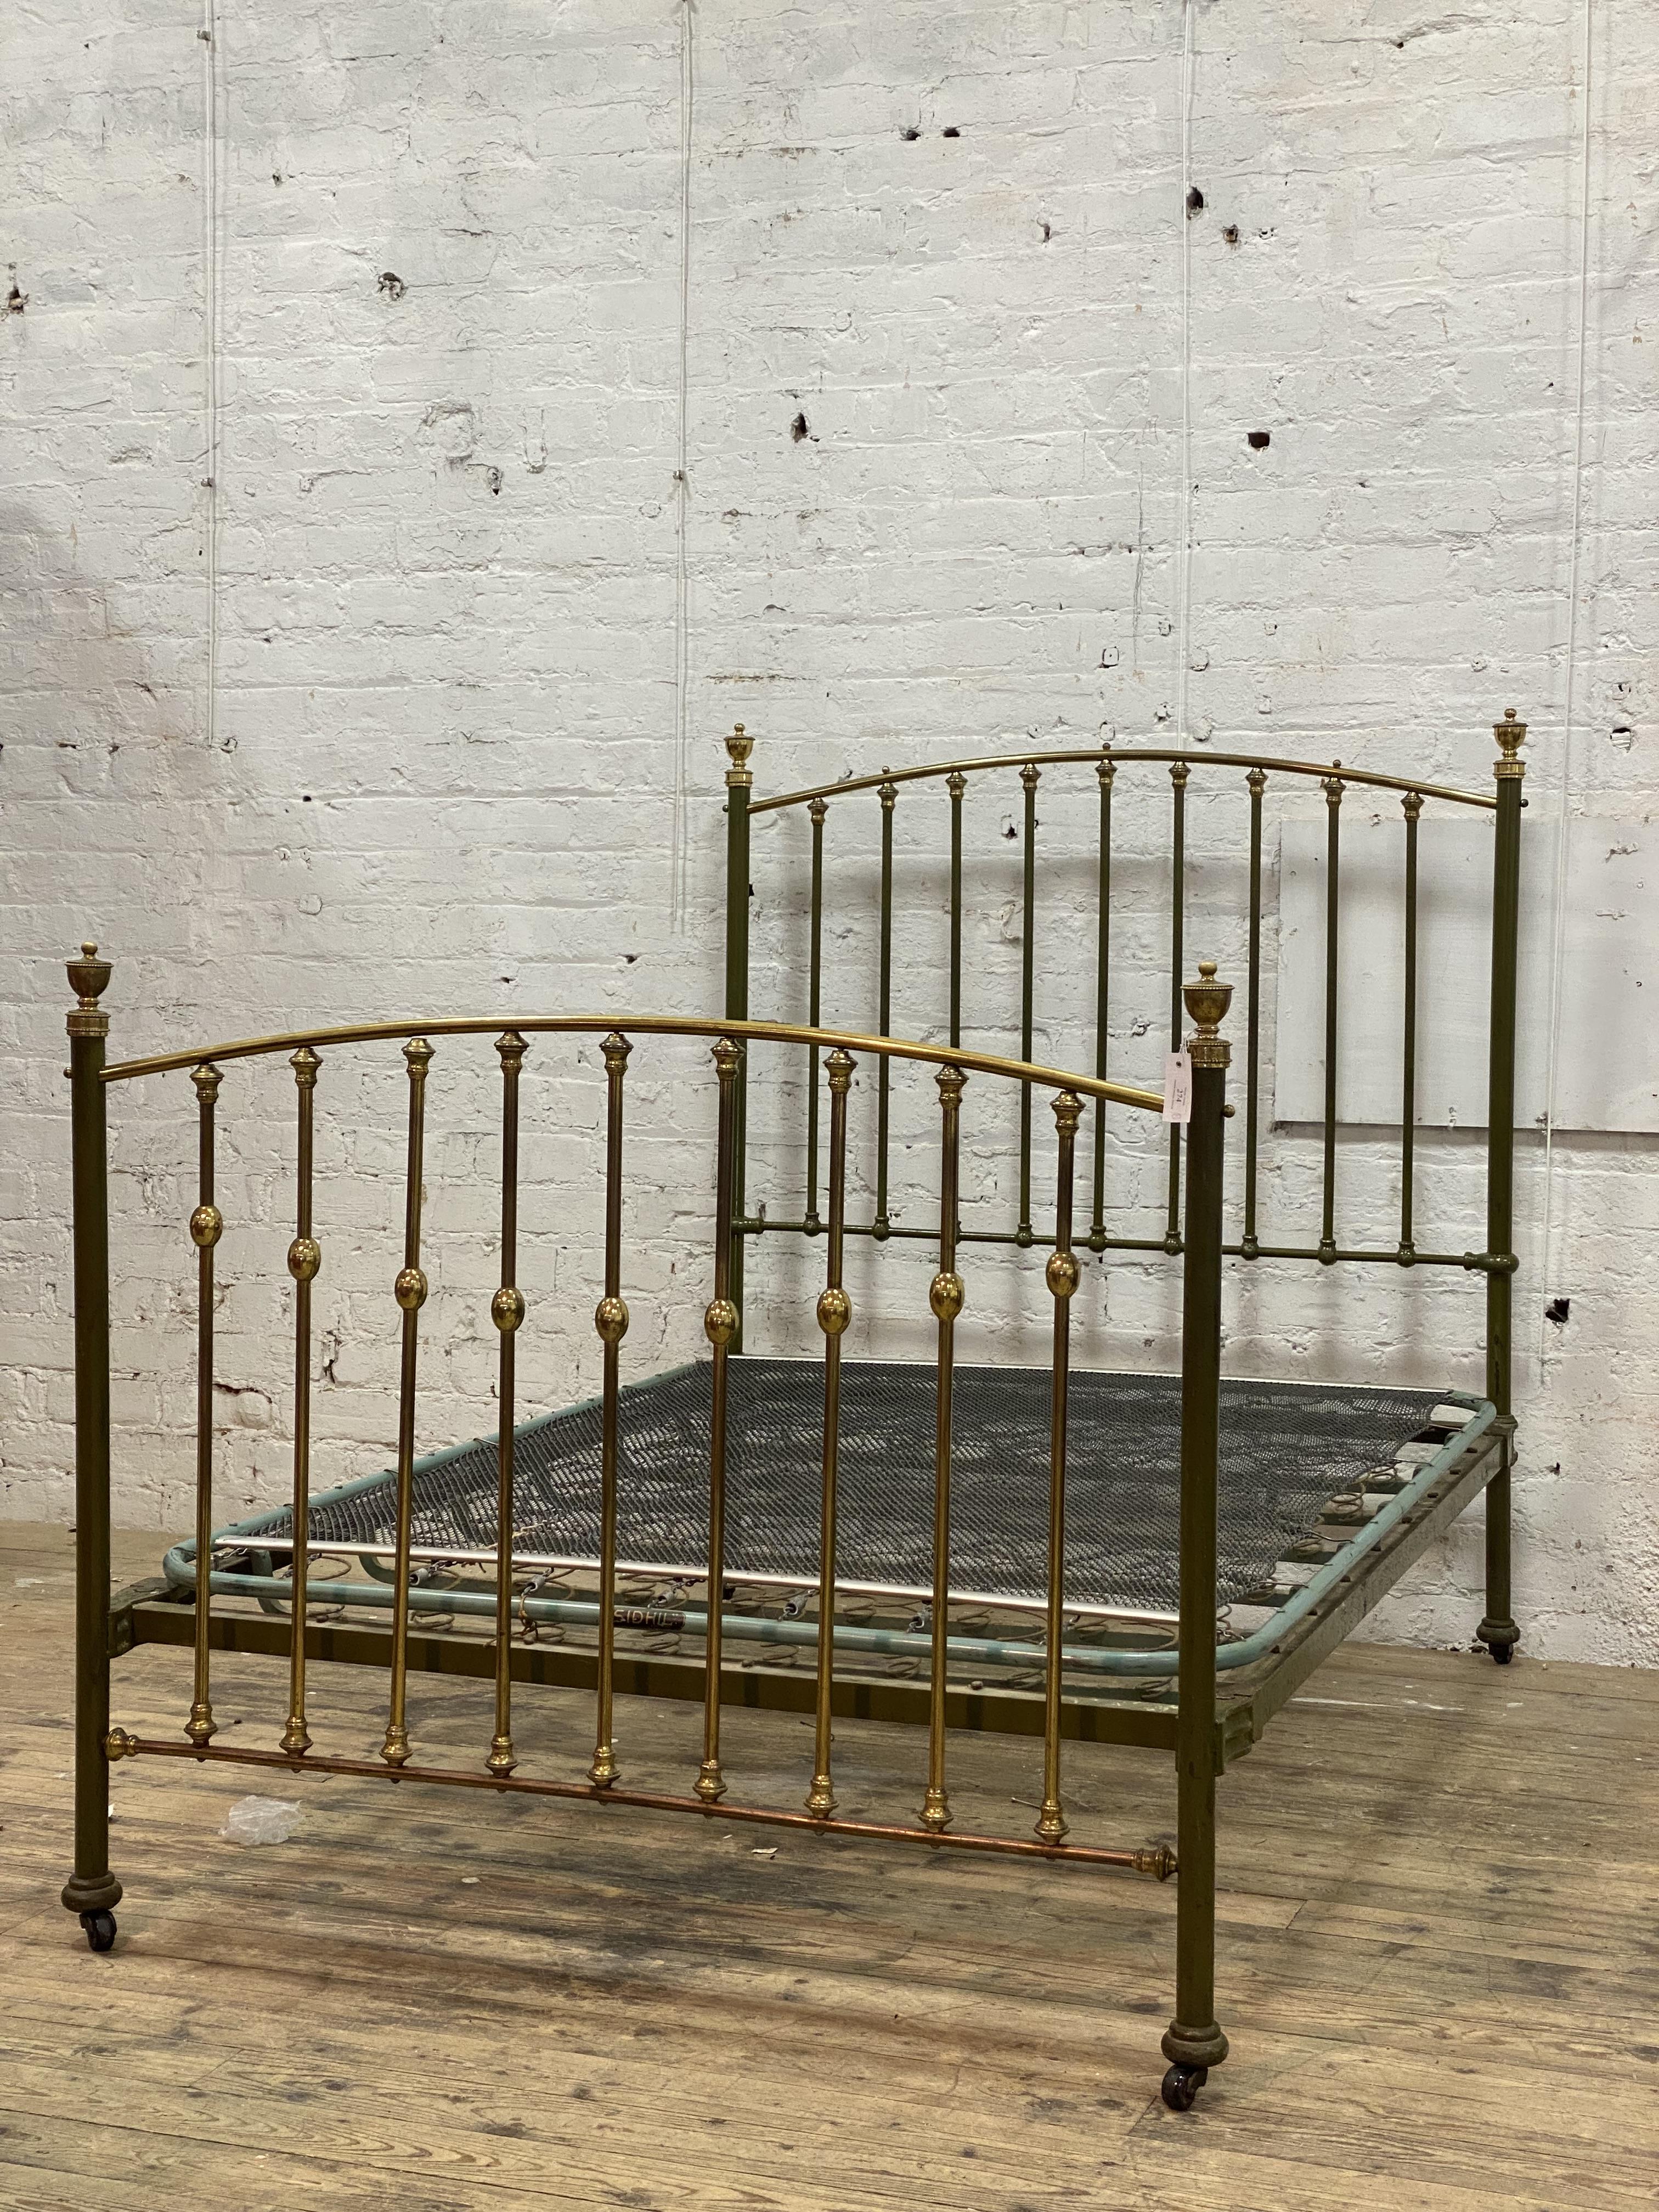 An Edwardian brass and green lacquered double bed frame, with urn finials, sprung base and moving on